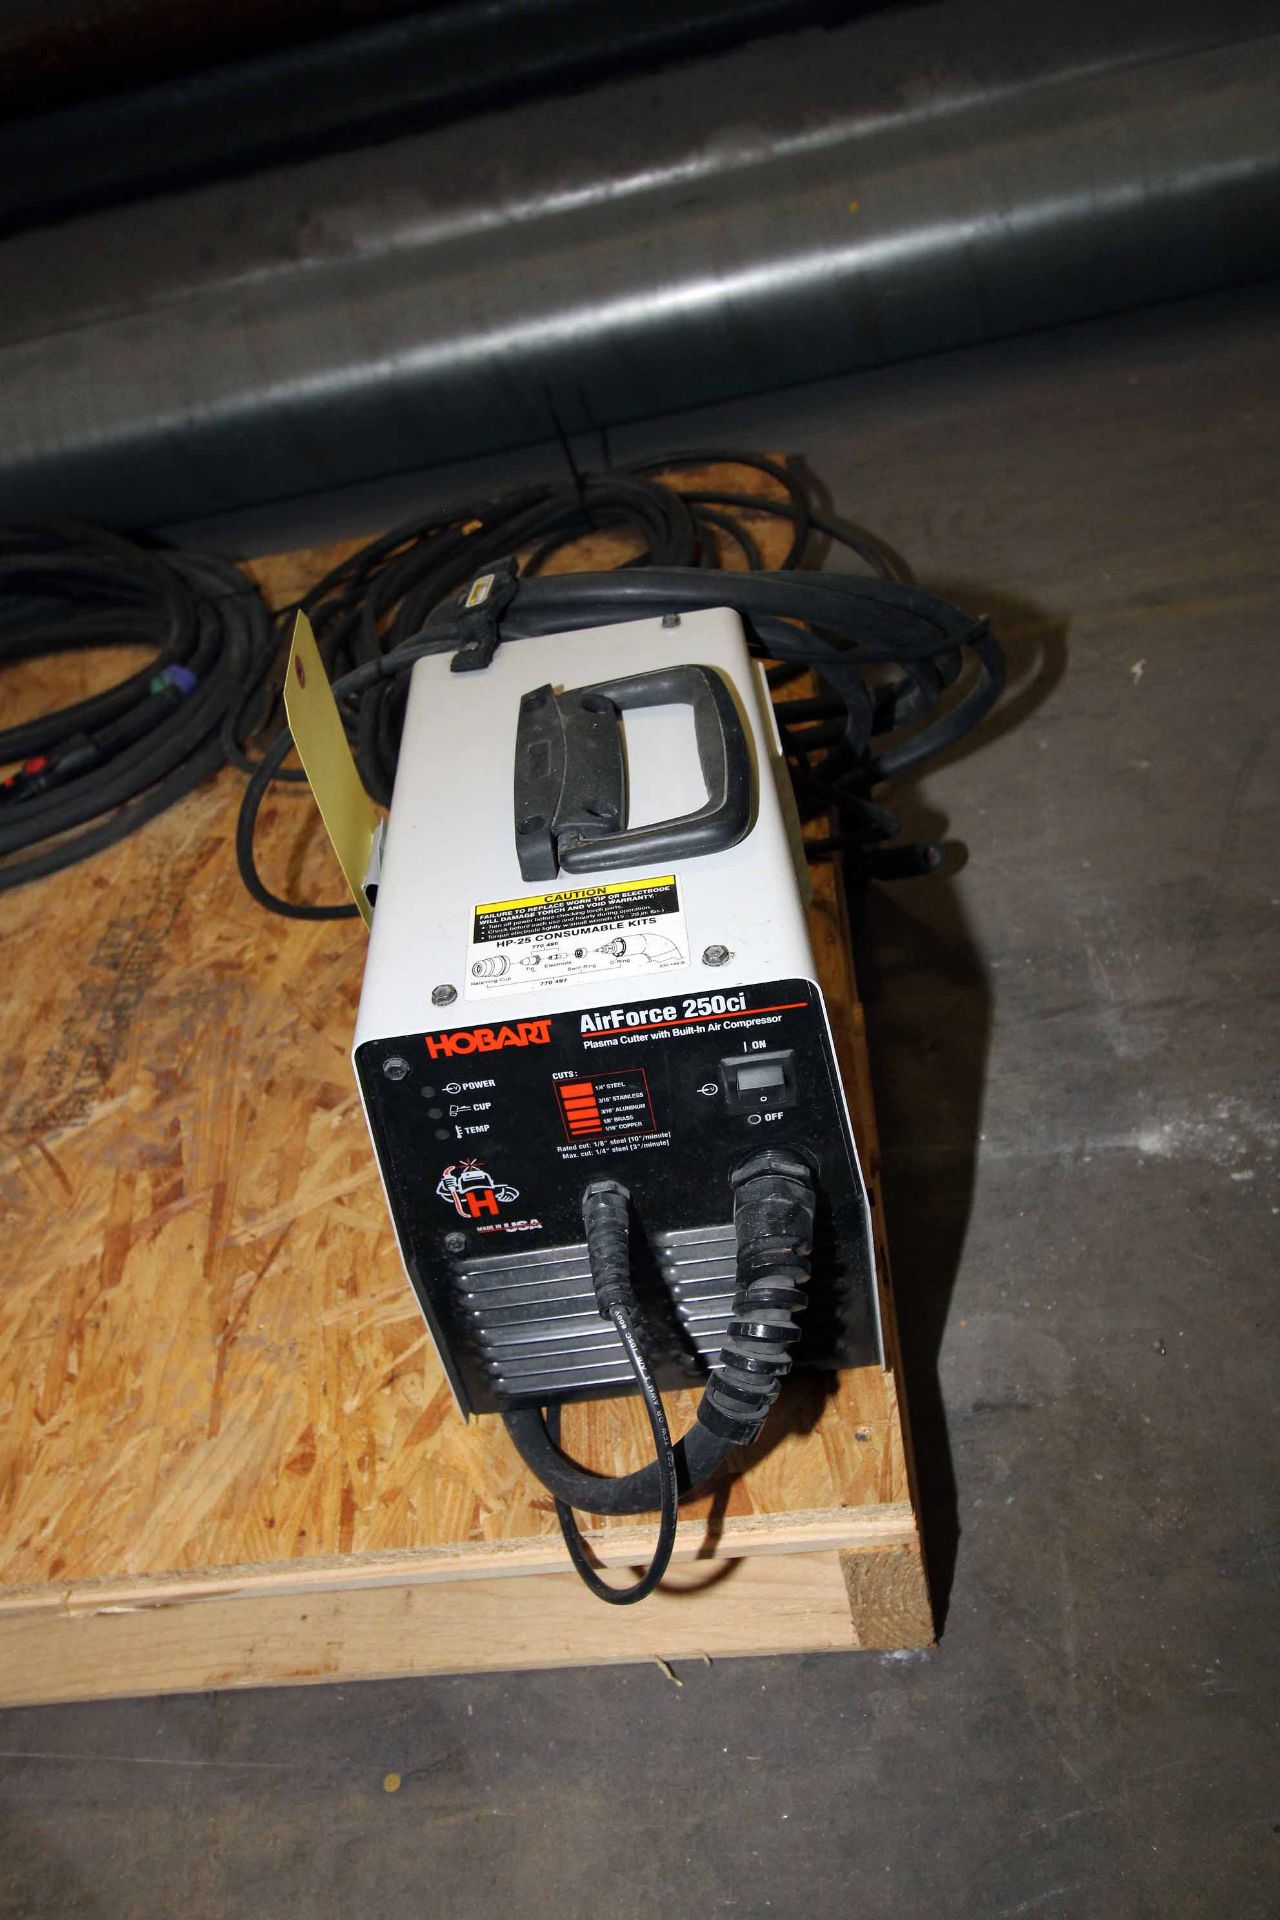 PLASMA CUTTER, HOBART AIR FORCE 250CI, built in air-conditioner